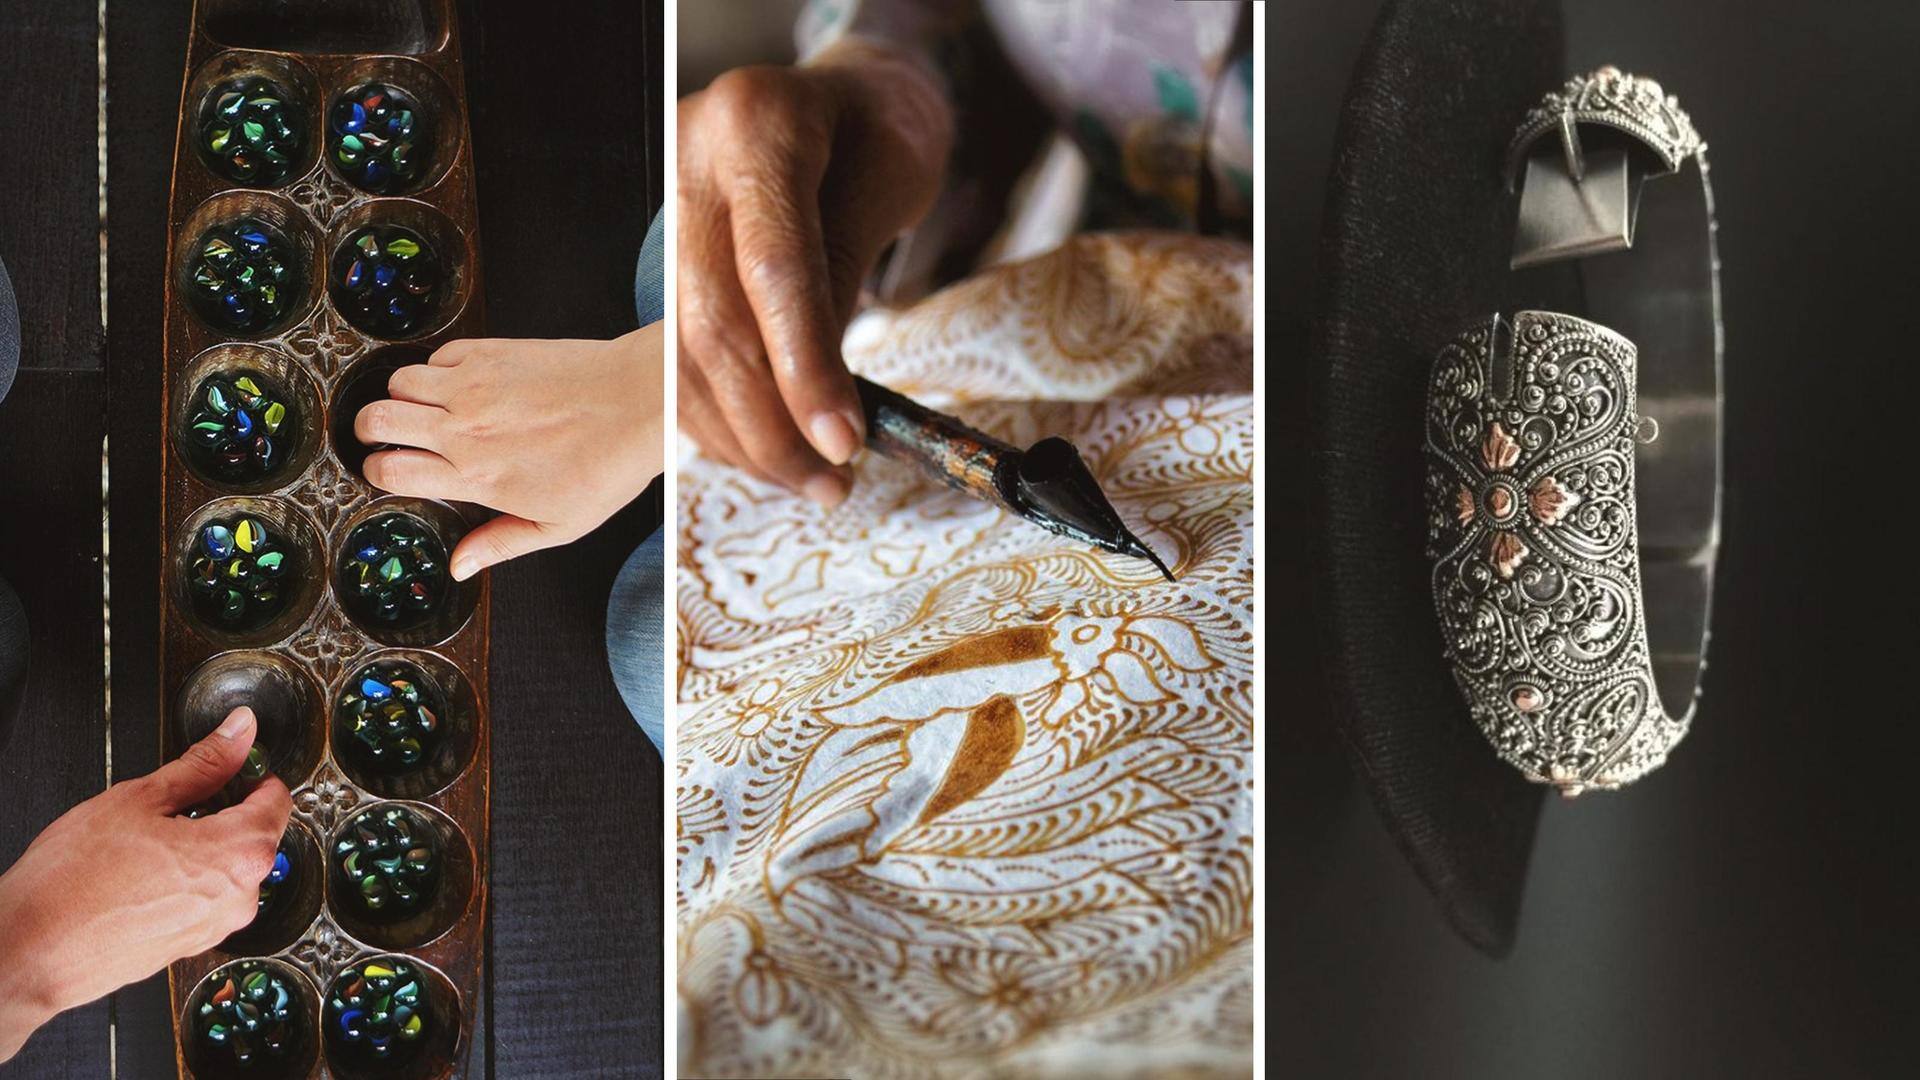 These culturally-rich souvenirs from Indonesia are worth bringing back home